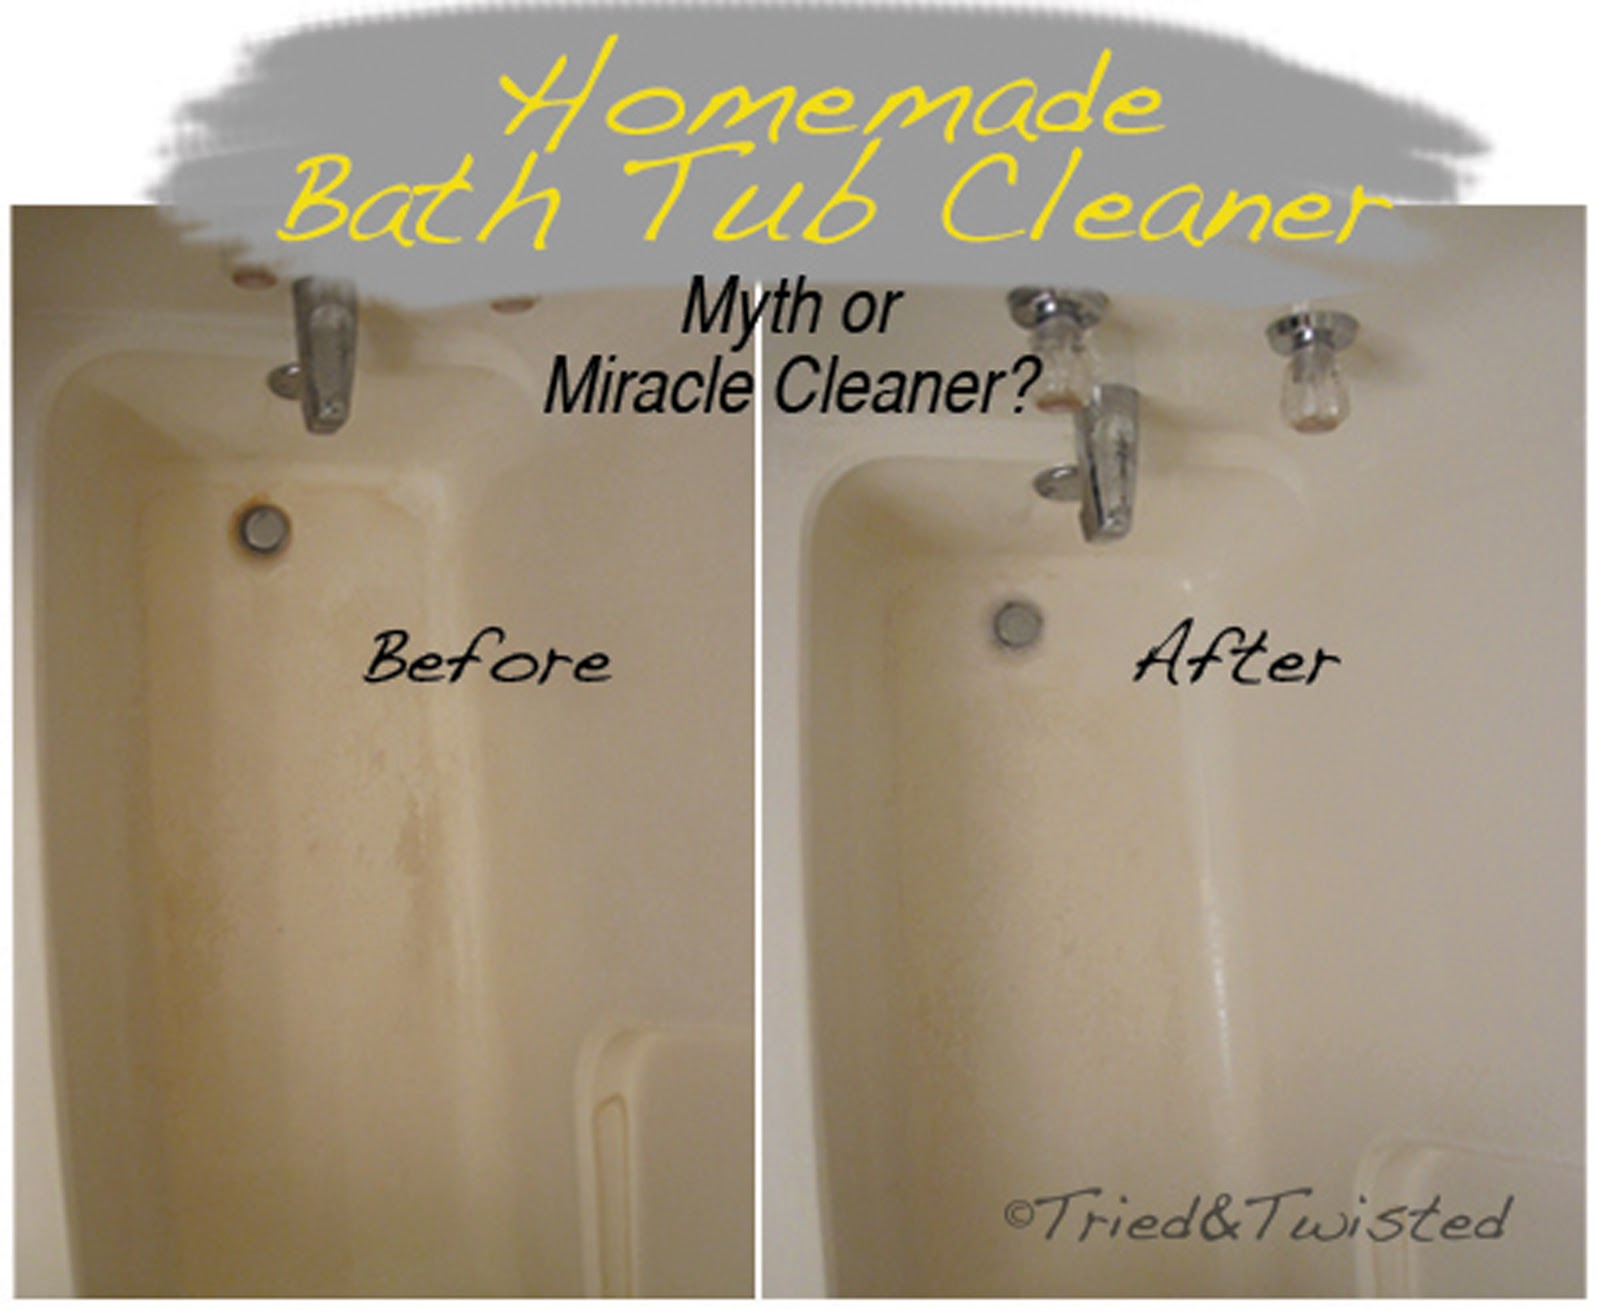 Tried And Twisted Myth Or Miracle Cleaner Series Clean Your Bath regarding size 1600 X 1312